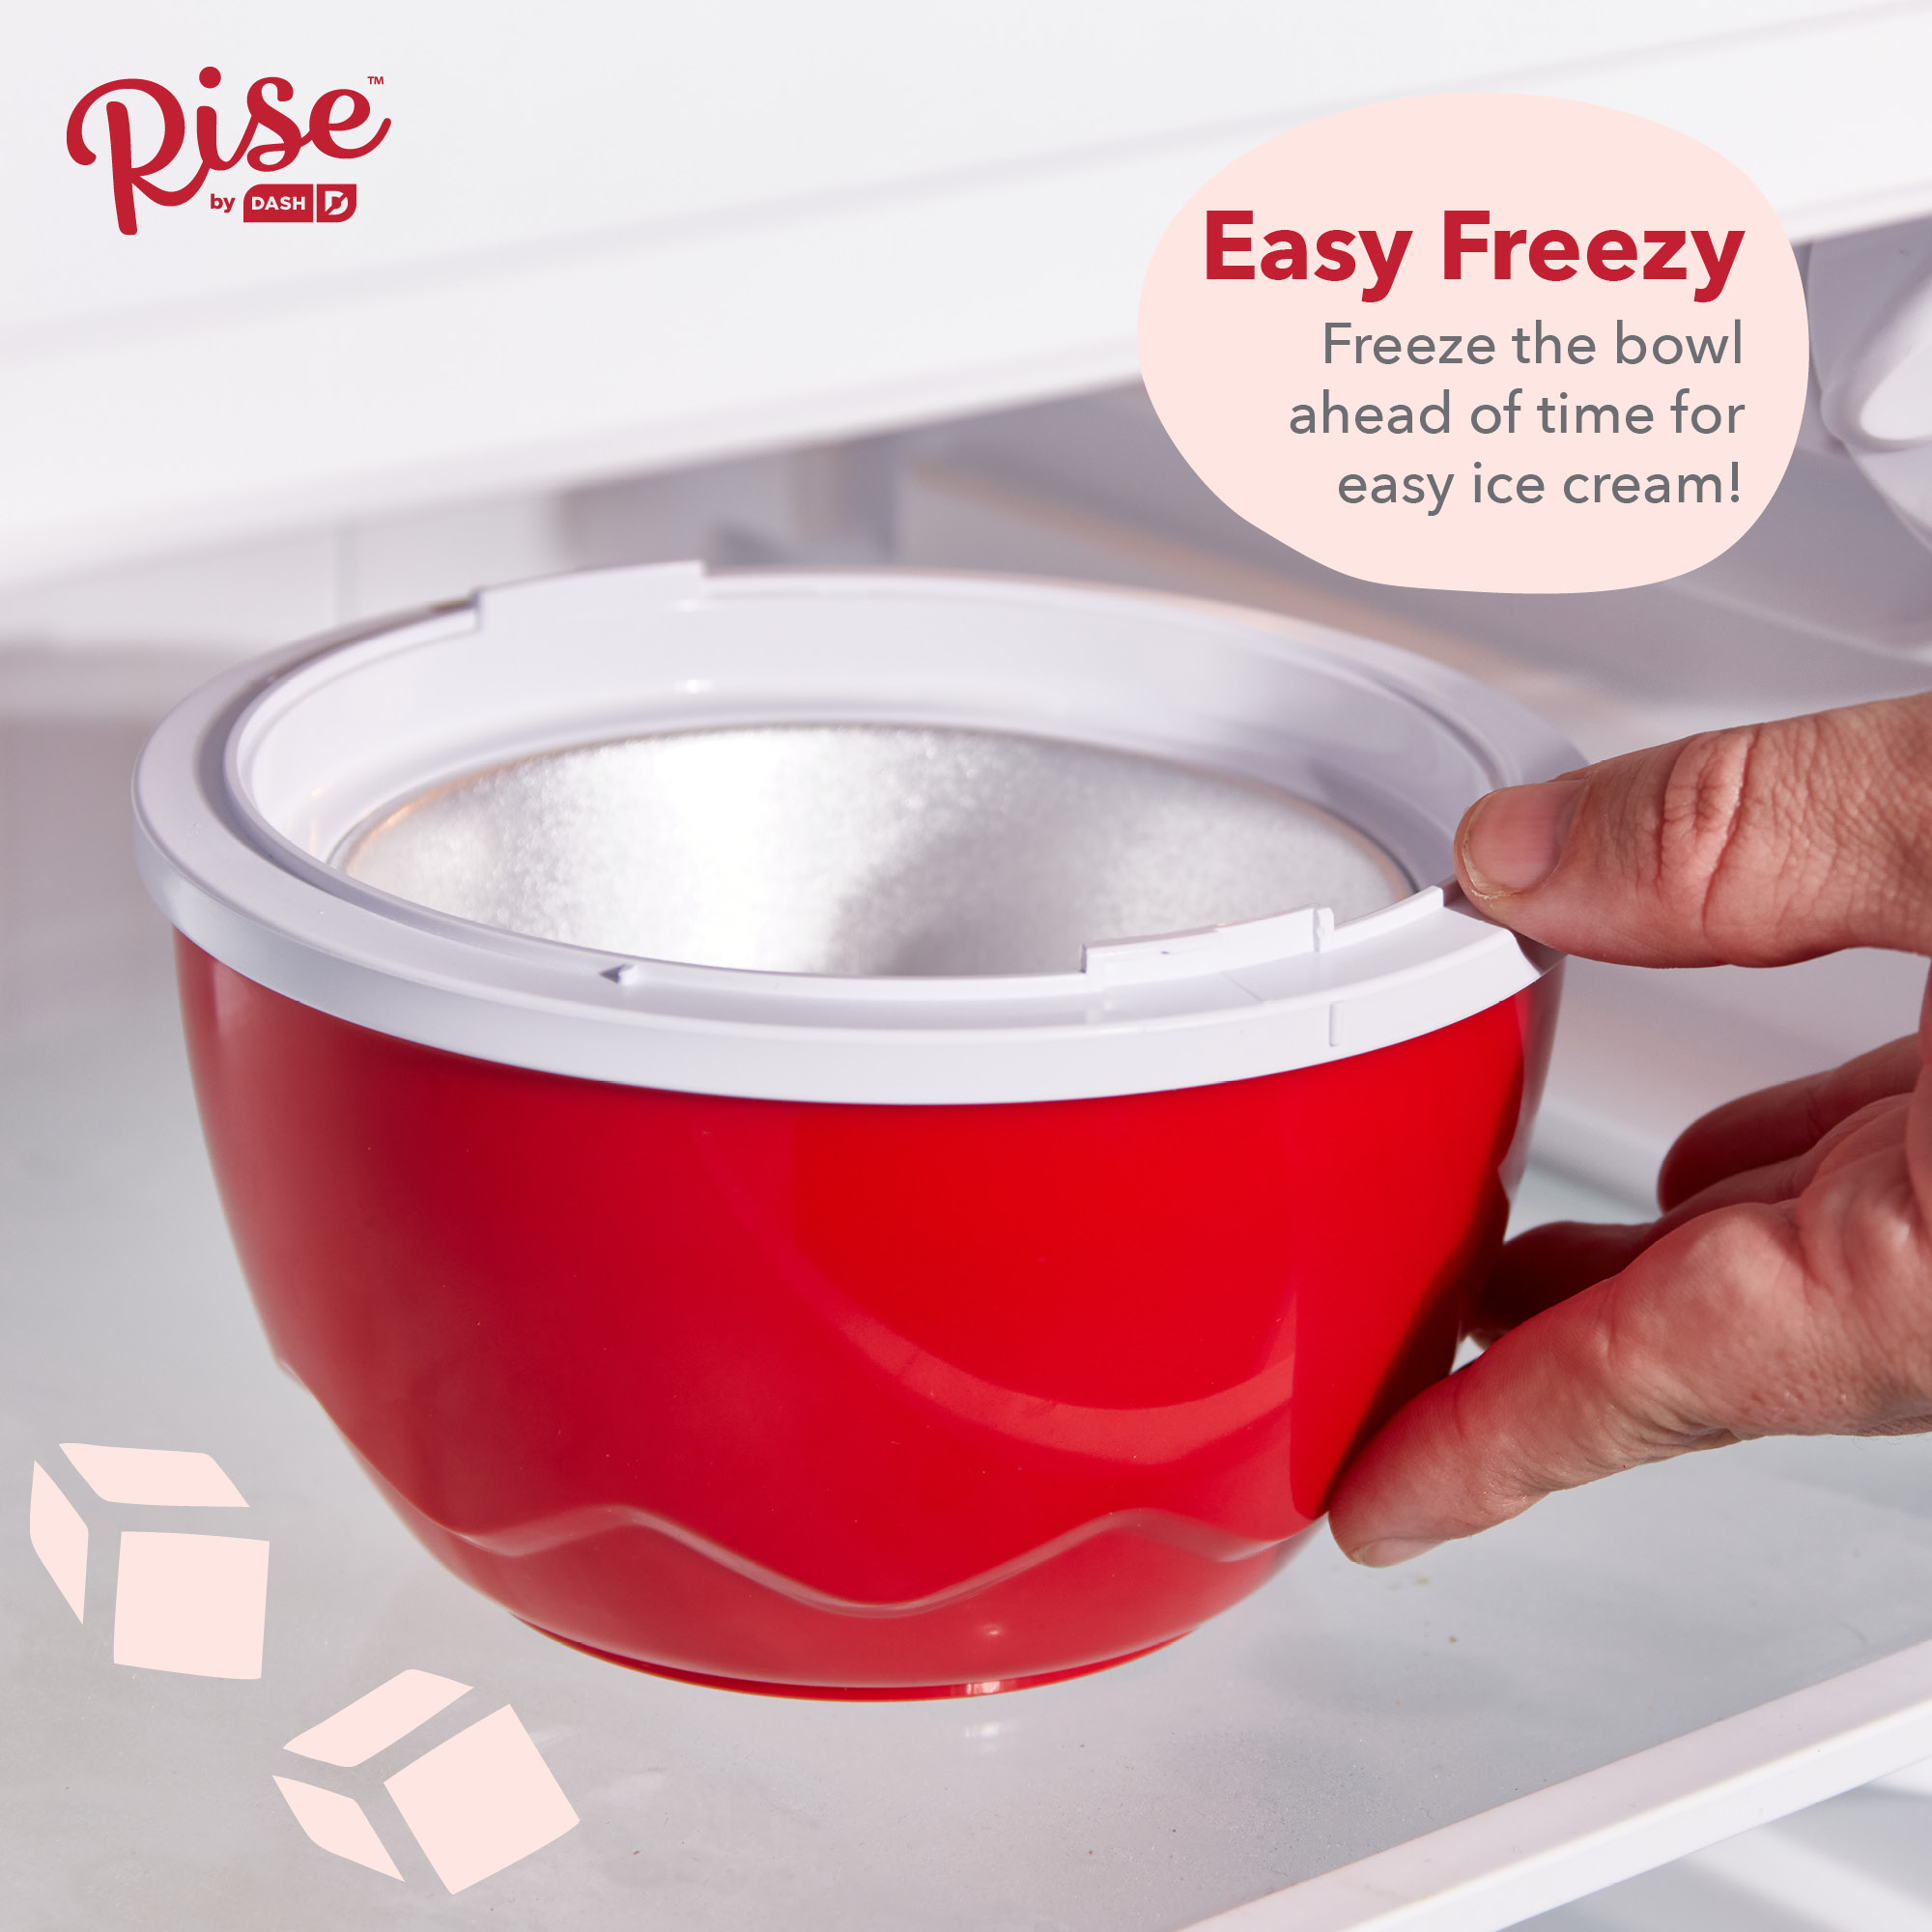 Rise by Dash Personal Electric Ice Cream Maker for Gelato, Sorbet + Frozen Yogurt (Healthy Snacks + Dessert for Kids & Adults) - 1 Pint - Red - 2.6 lb. - image 5 of 7